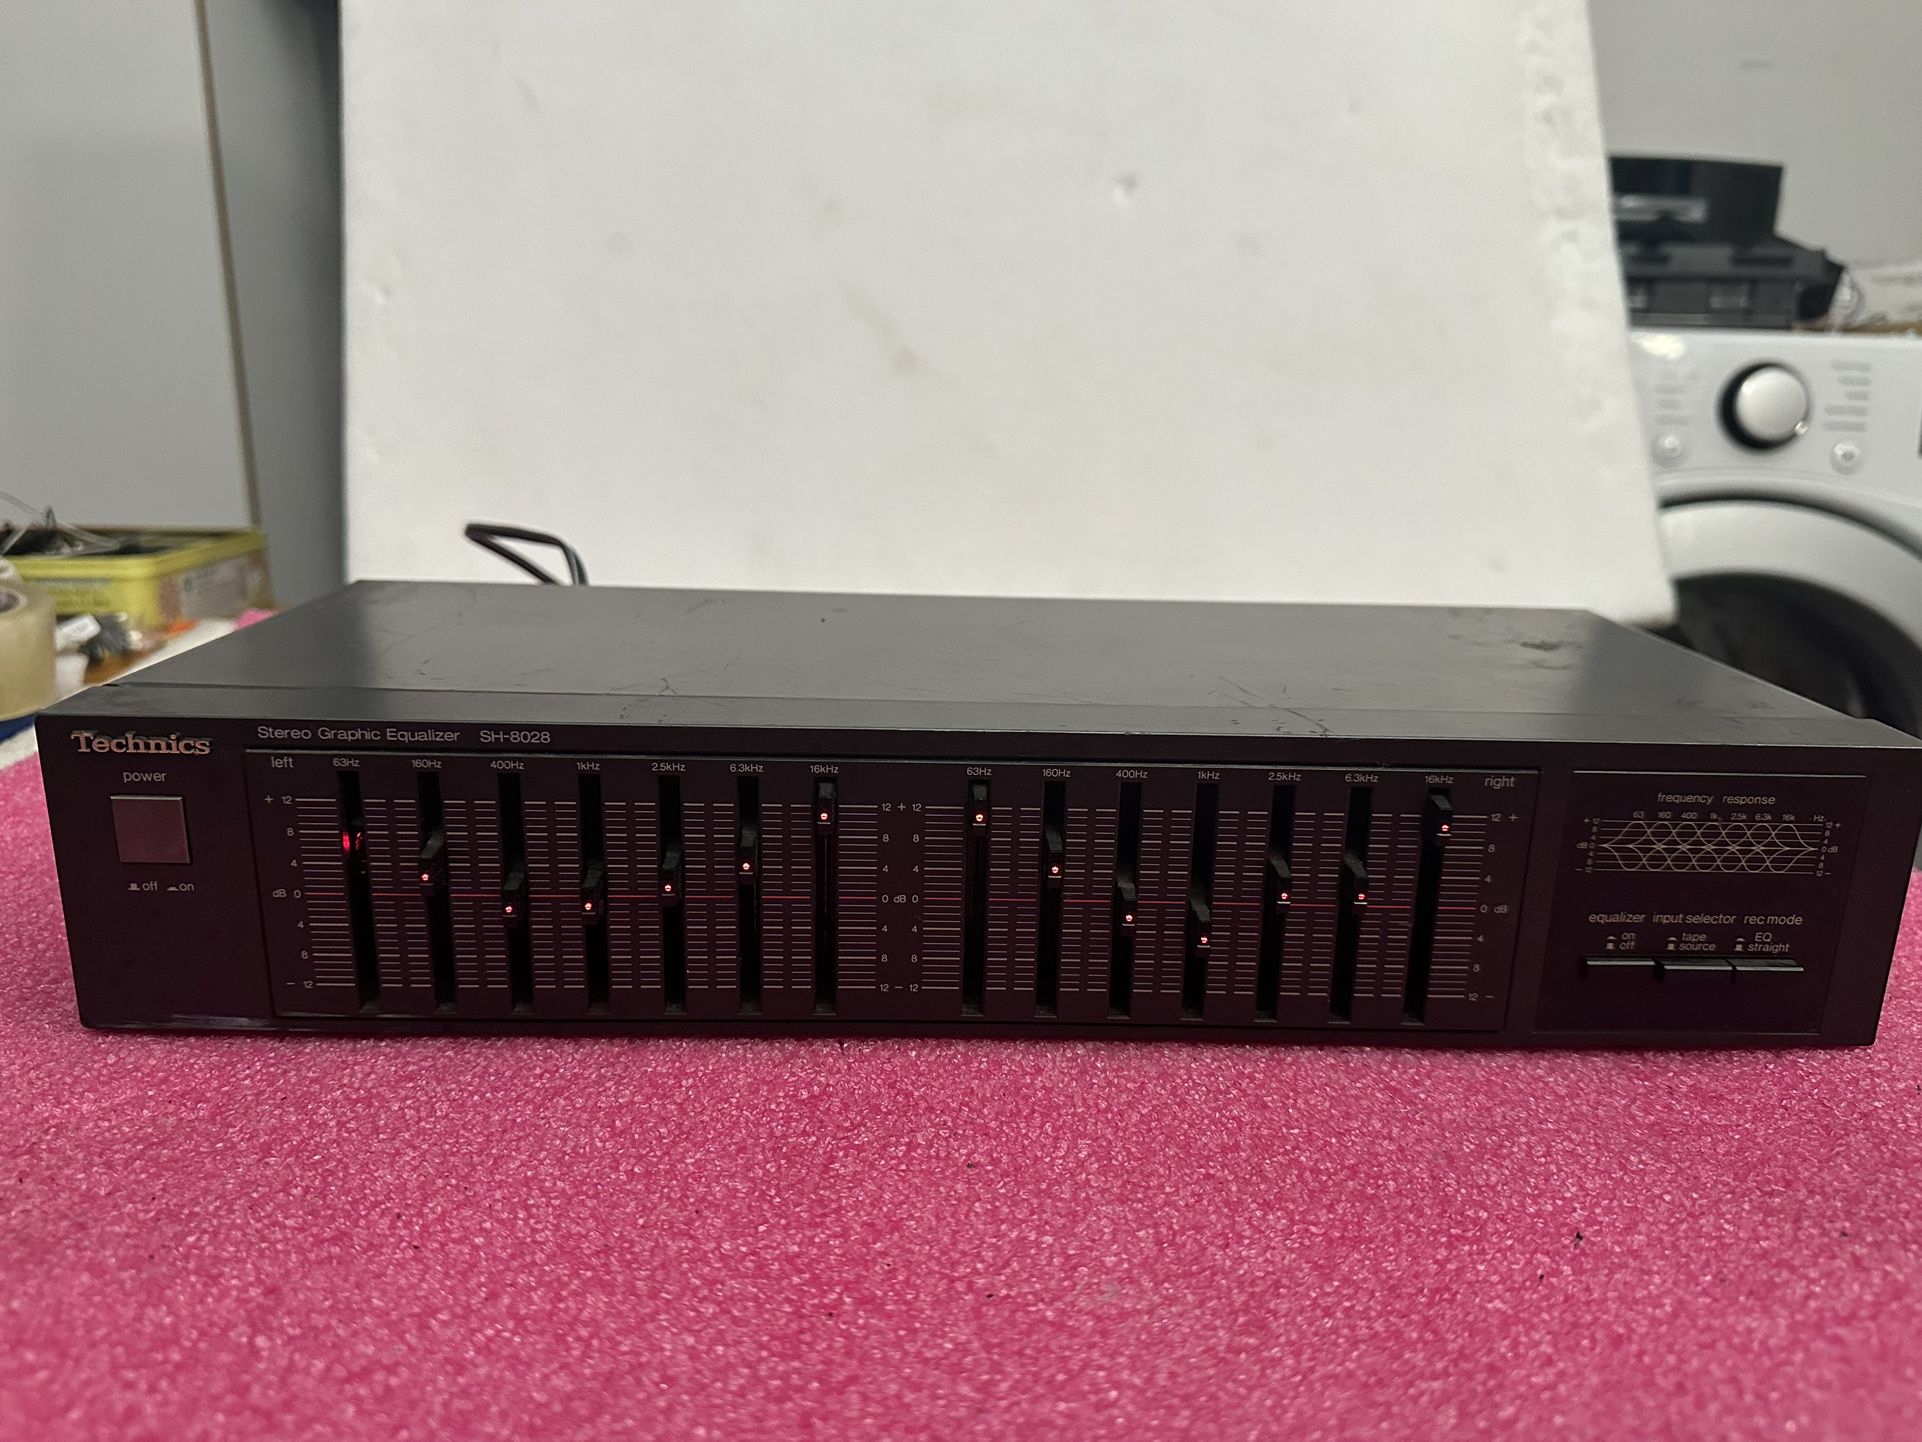 Technics SH-8028 Stereo Graphic Equalizer. MADE IN JAPAN